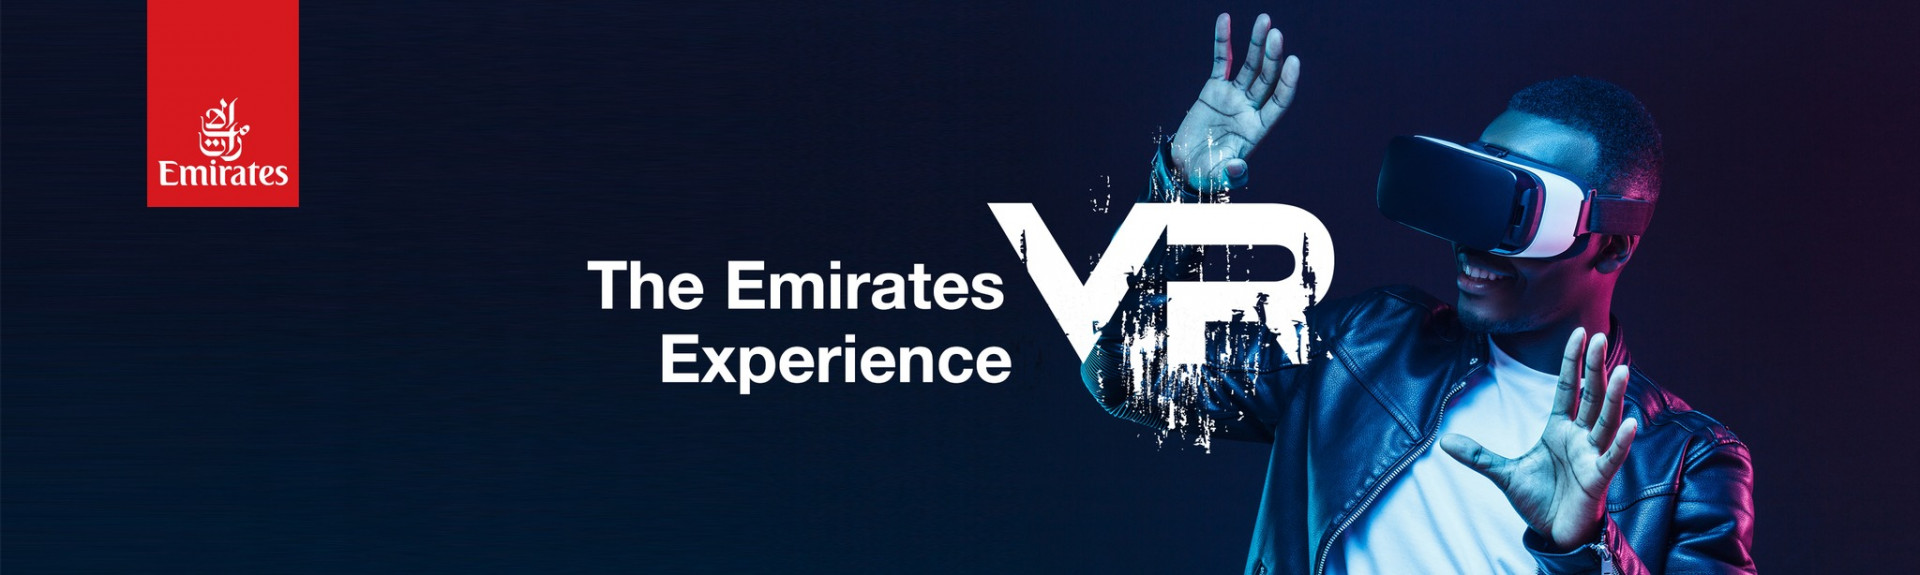 The Emirates VR Experience